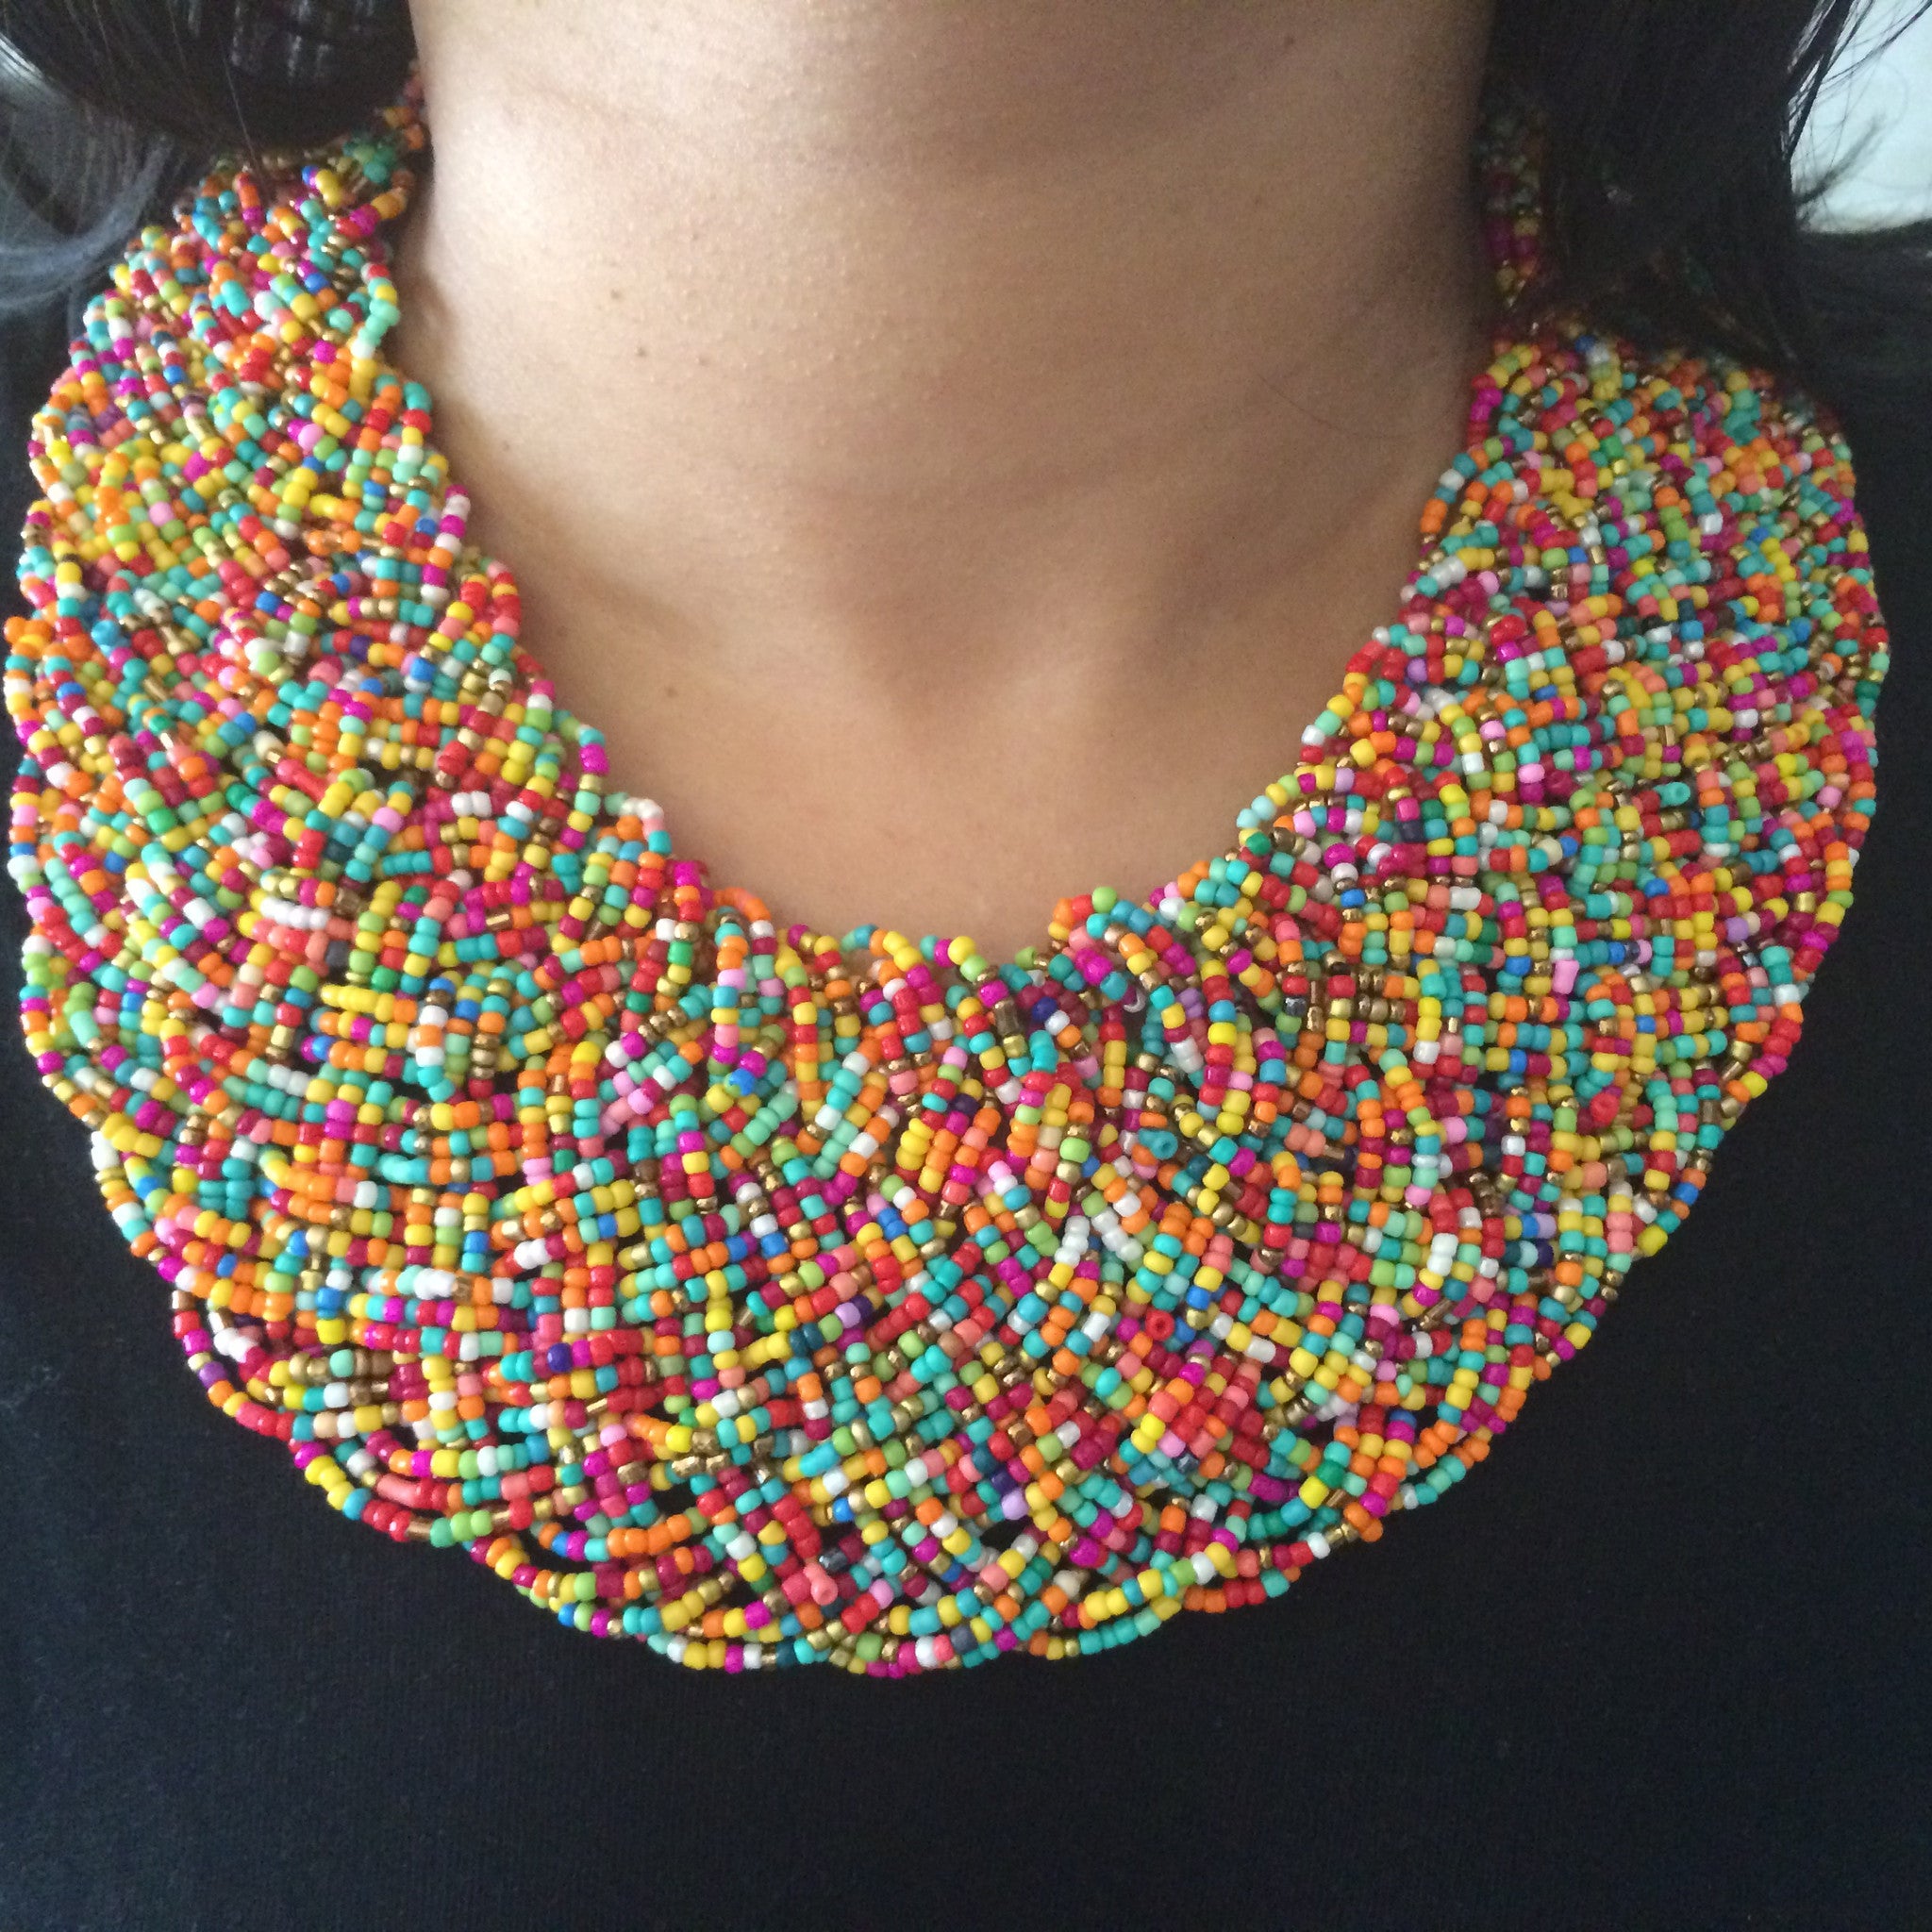 WEST AFRICAN BEADED NECKLACE by kiunobeads - Mid-long necklaces - Afrikrea